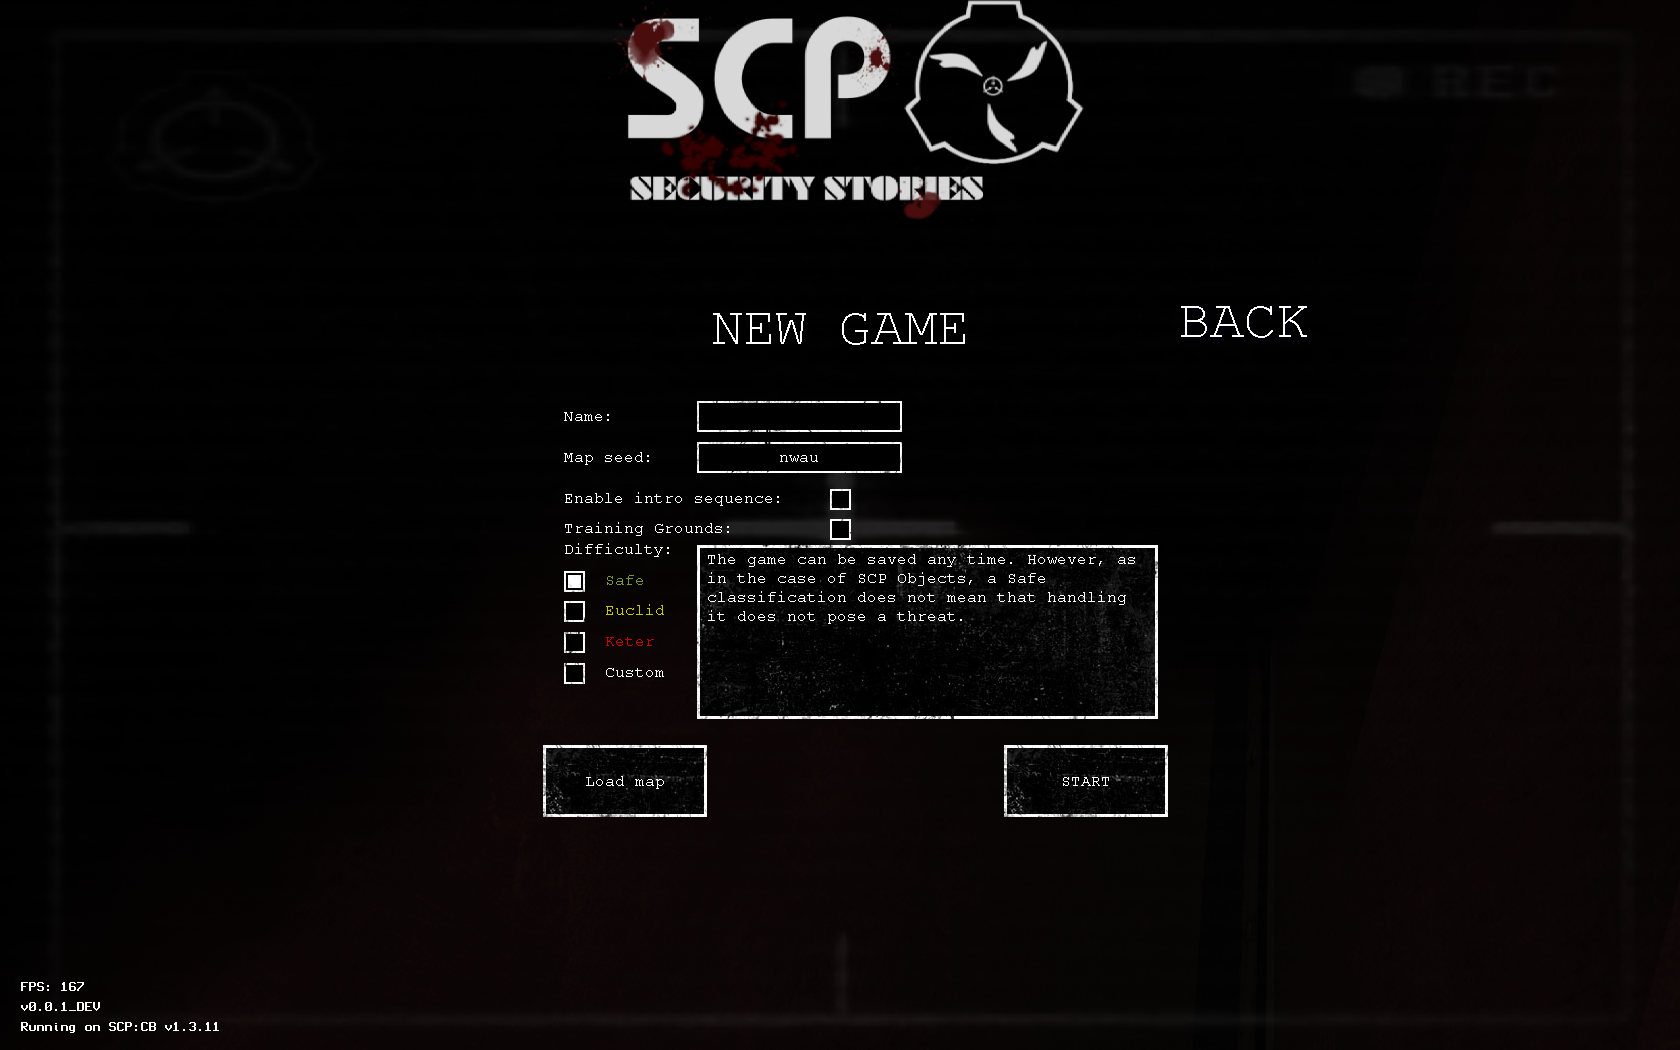 how to activate console commands in scp containment breach